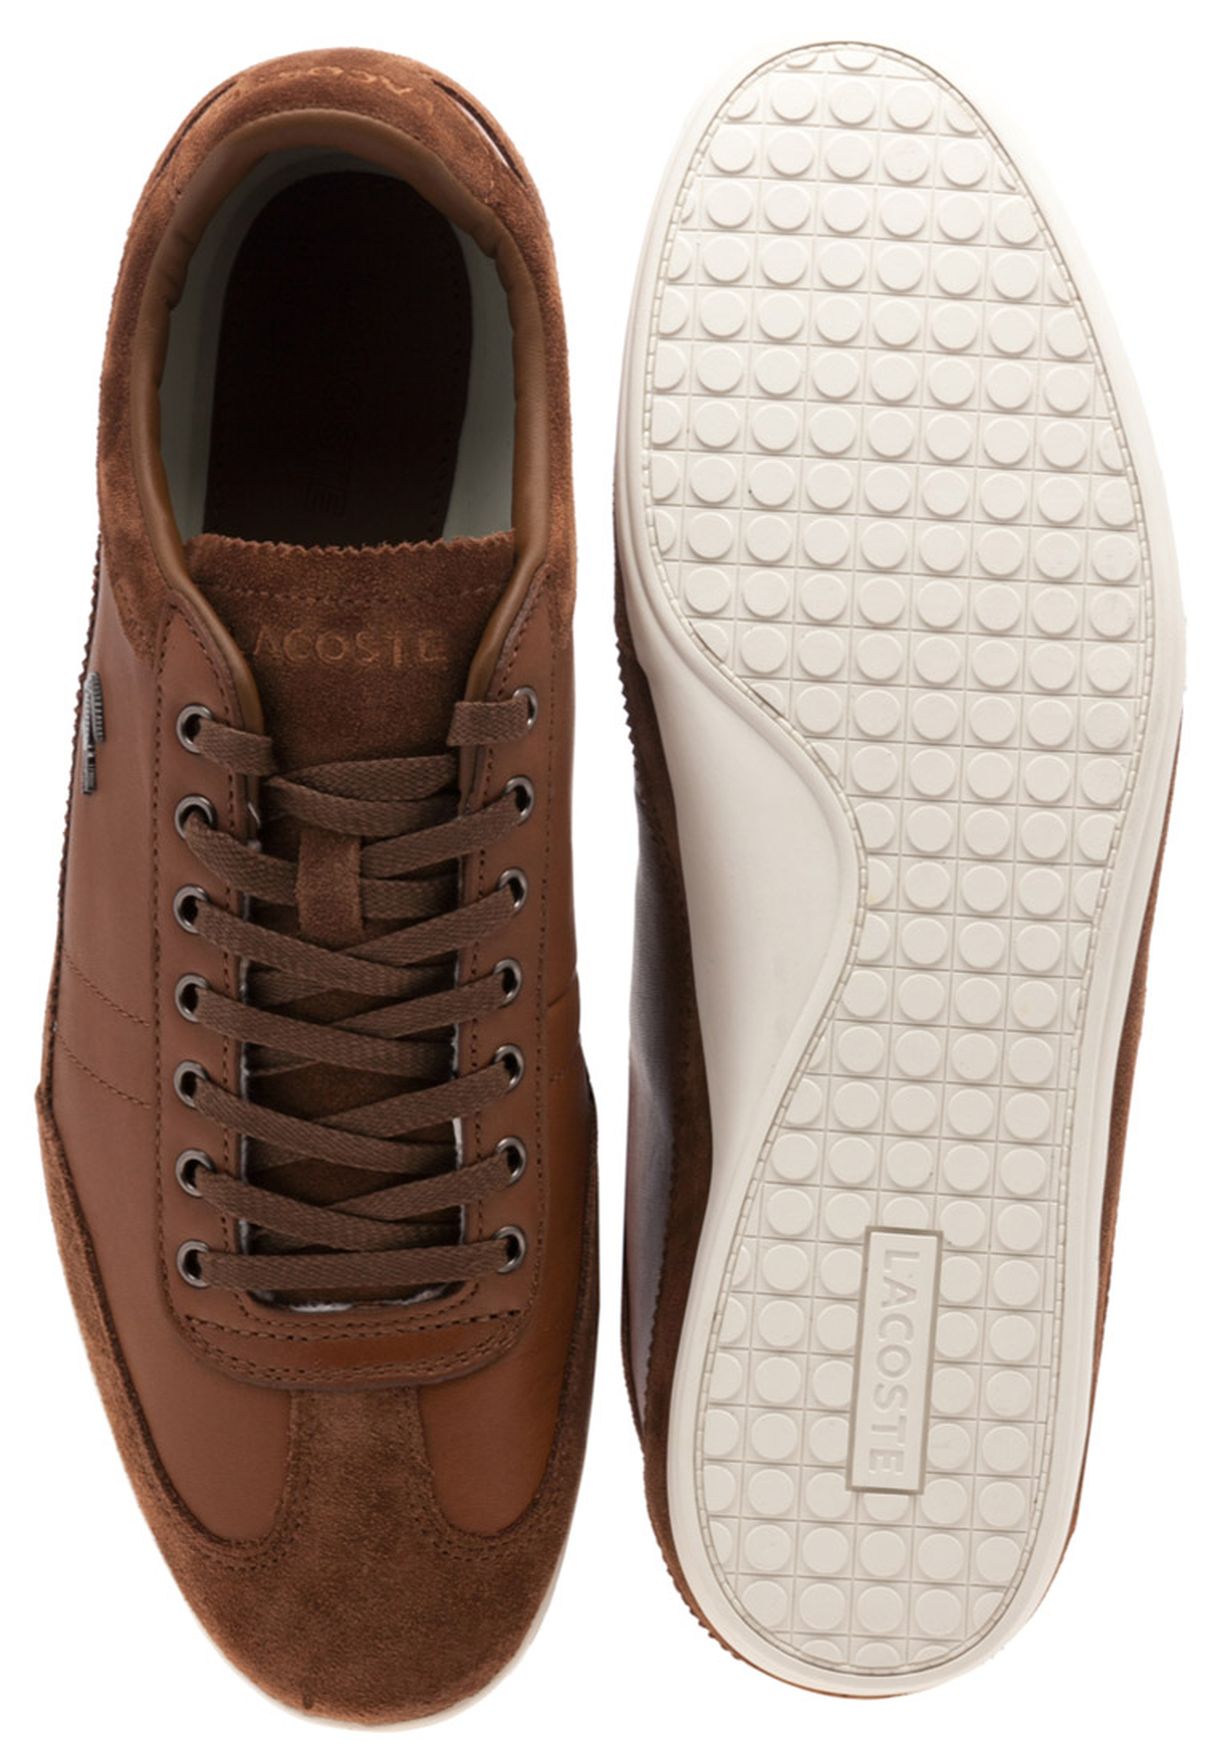 lacoste misano brown